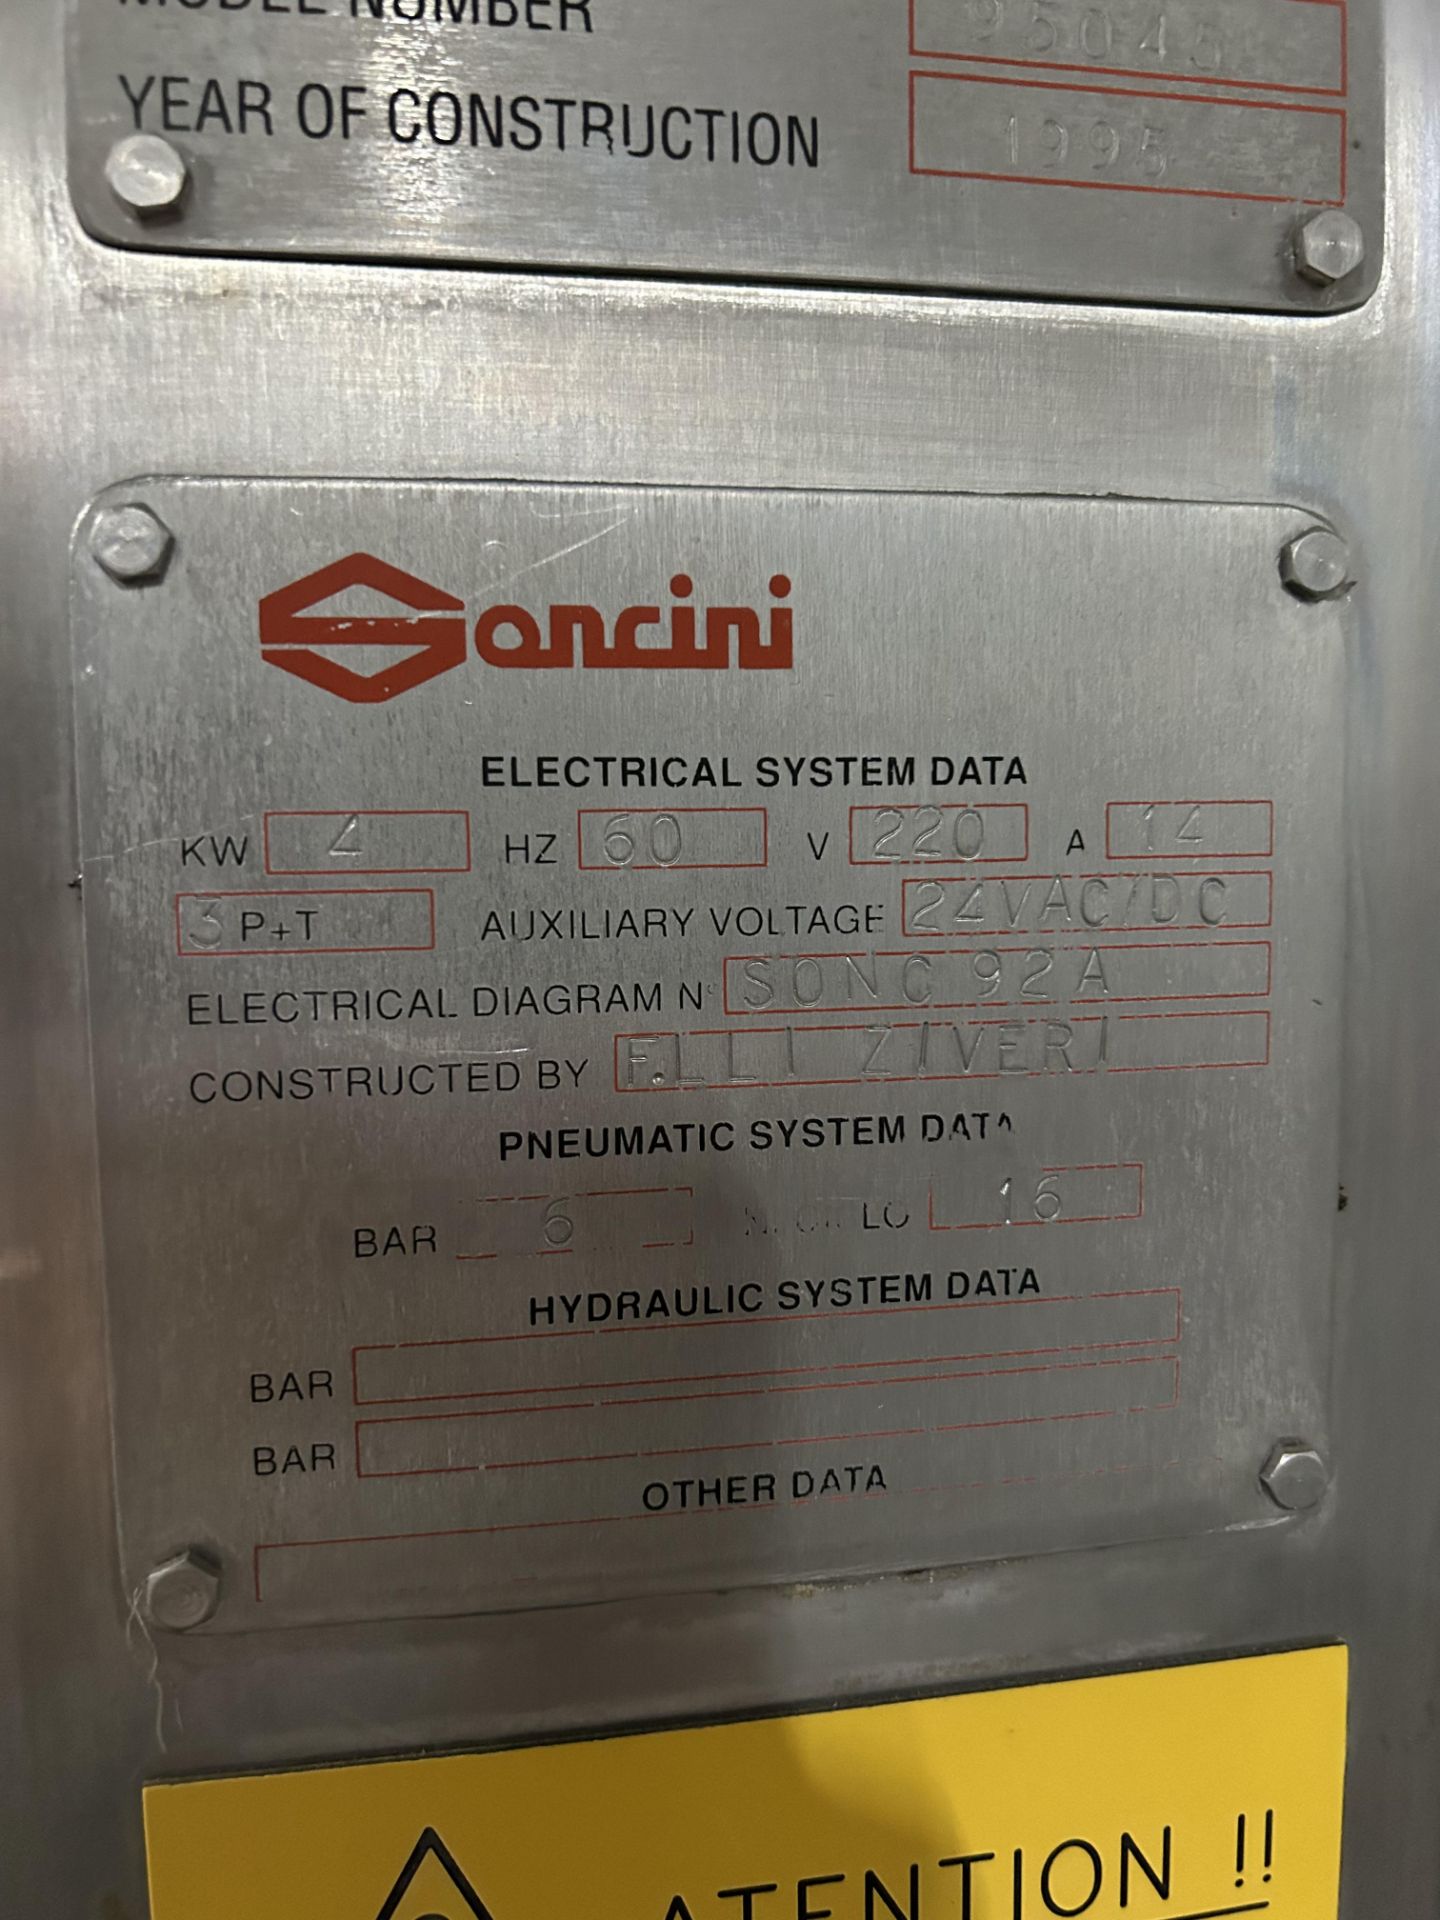 Soncini Messaging Machine , 4KW, 60Hz, 220V, 14A, Model No. 95045 - Image 2 of 5